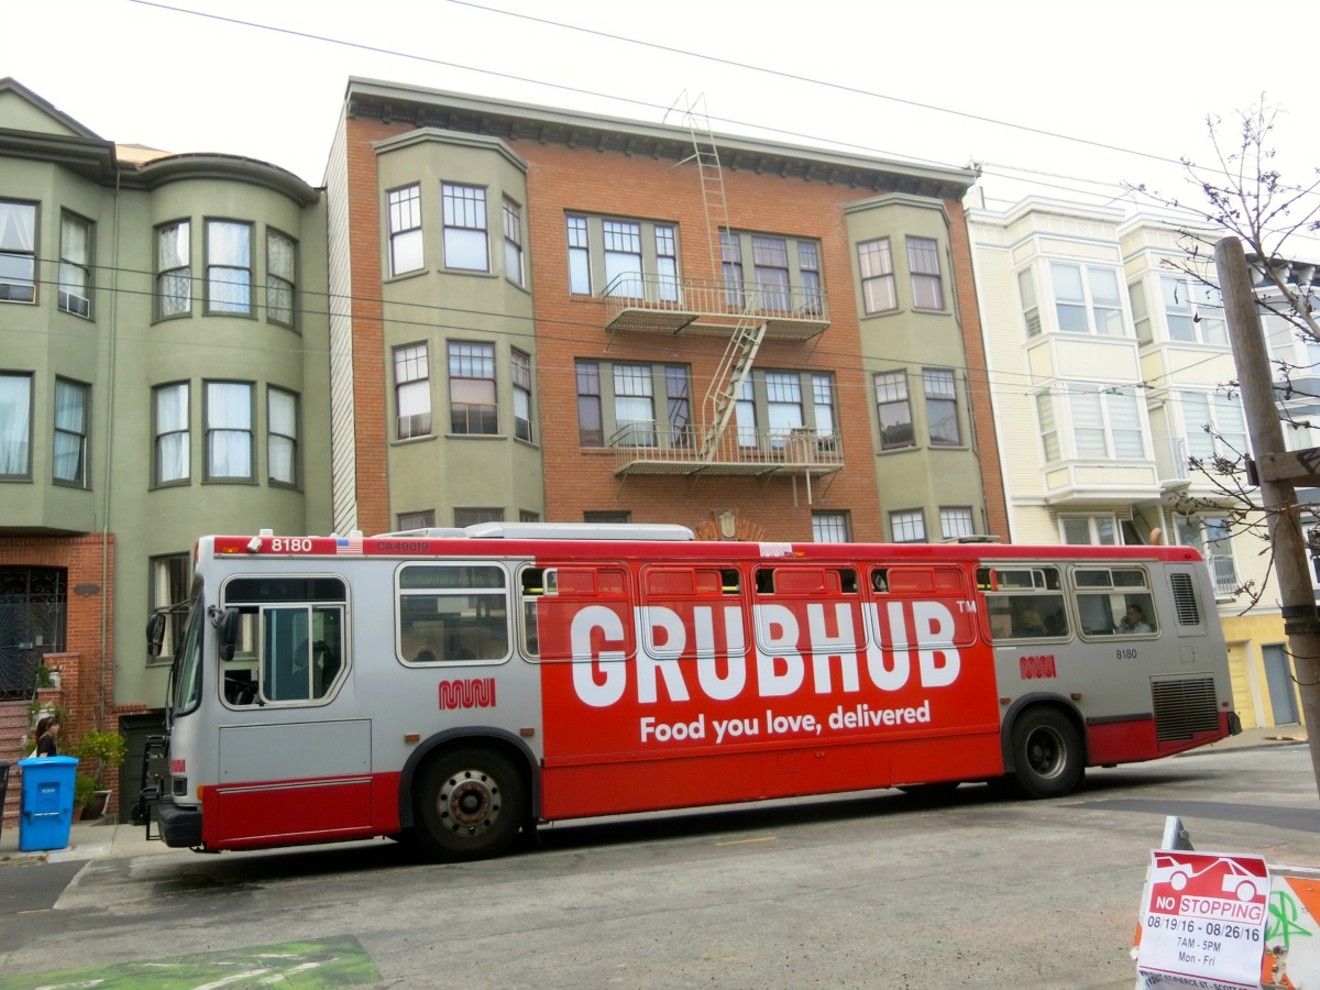 Grubhub and Postmates are being sued in MIami for websites that discriminate against people with visual disabilities.